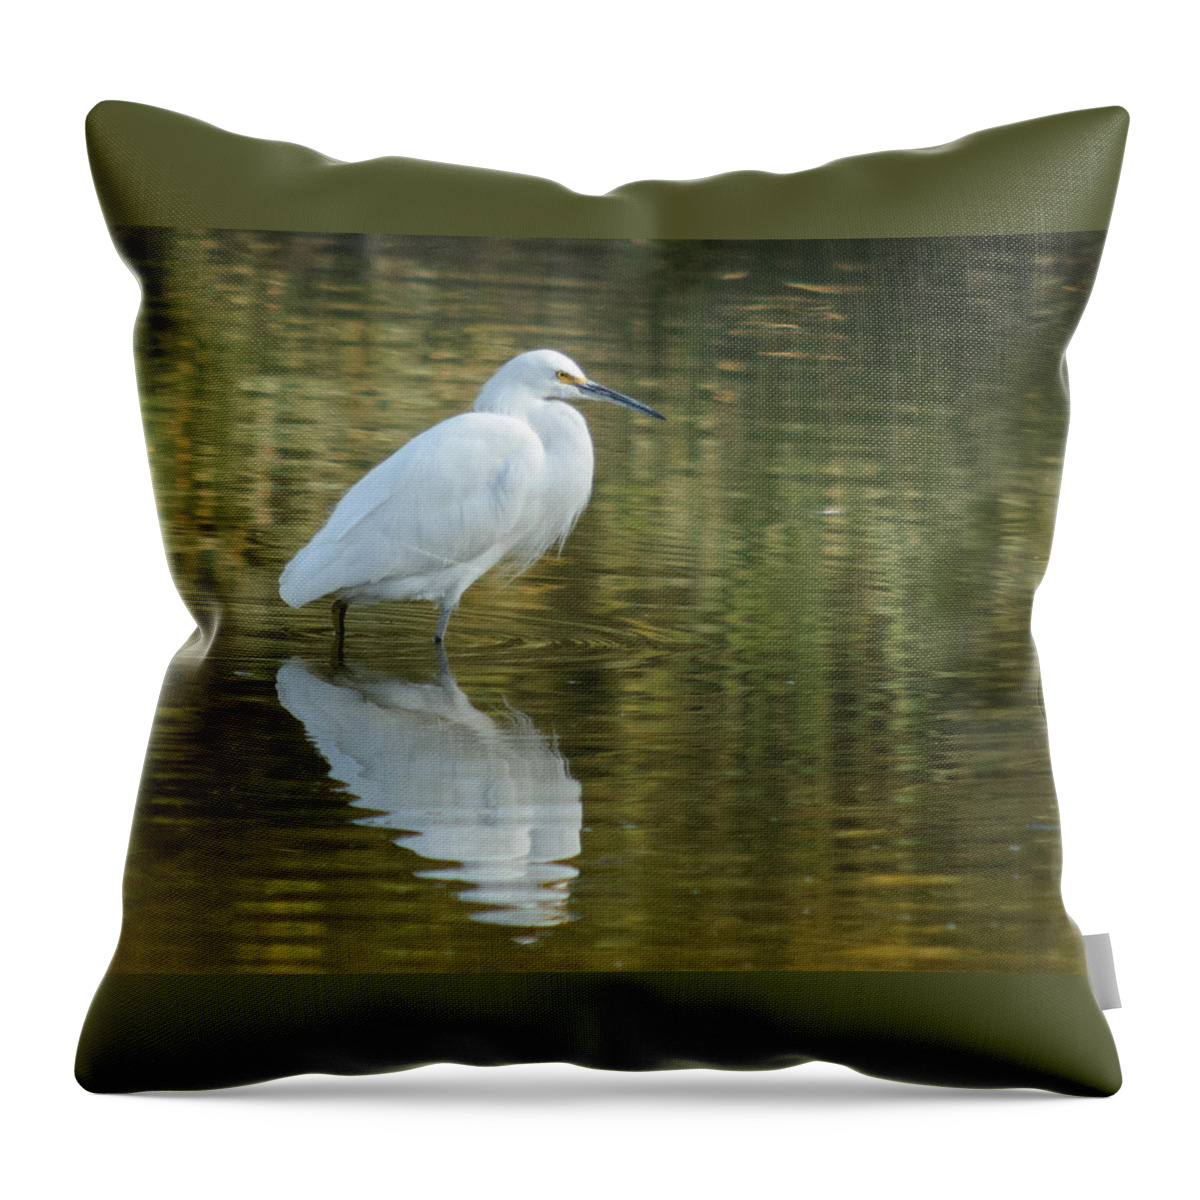 Egret Throw Pillow featuring the photograph Egret Reflection by Tam Ryan